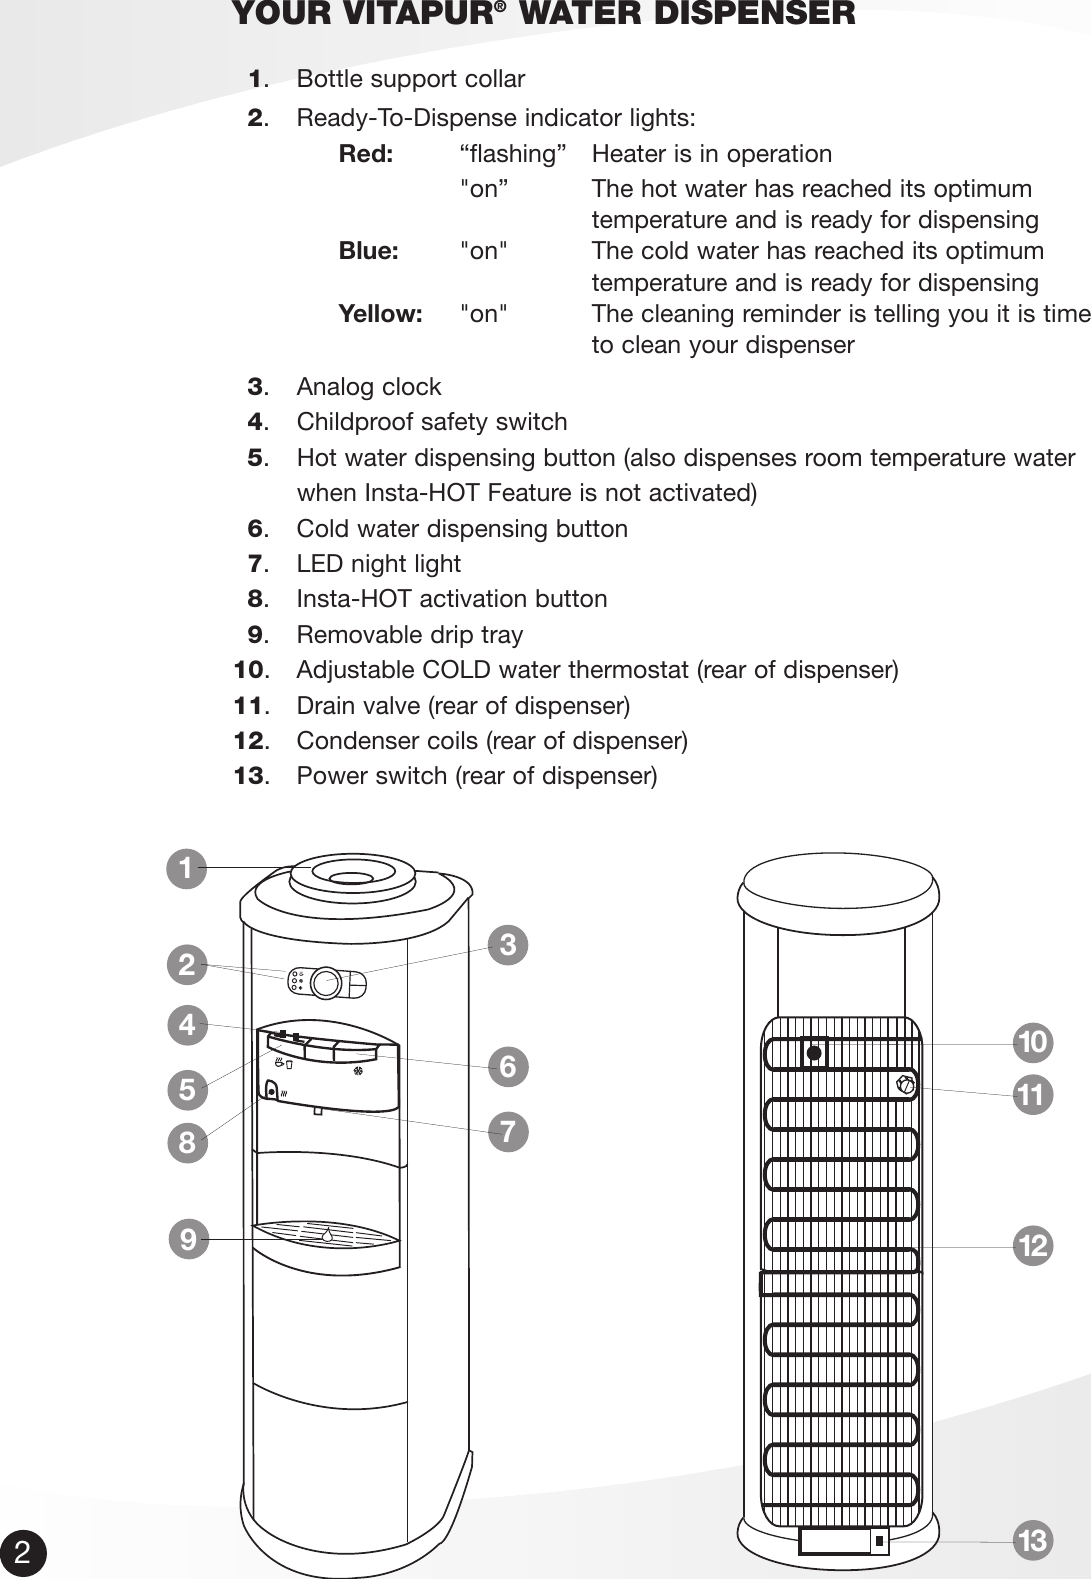 Page 3 of 10 - Vitapur Vitapur-Water-Dispenser-Use-And-Care-Manual- ManualsLib - Makes It Easy To Find Manuals Online!  Vitapur-water-dispenser-use-and-care-manual